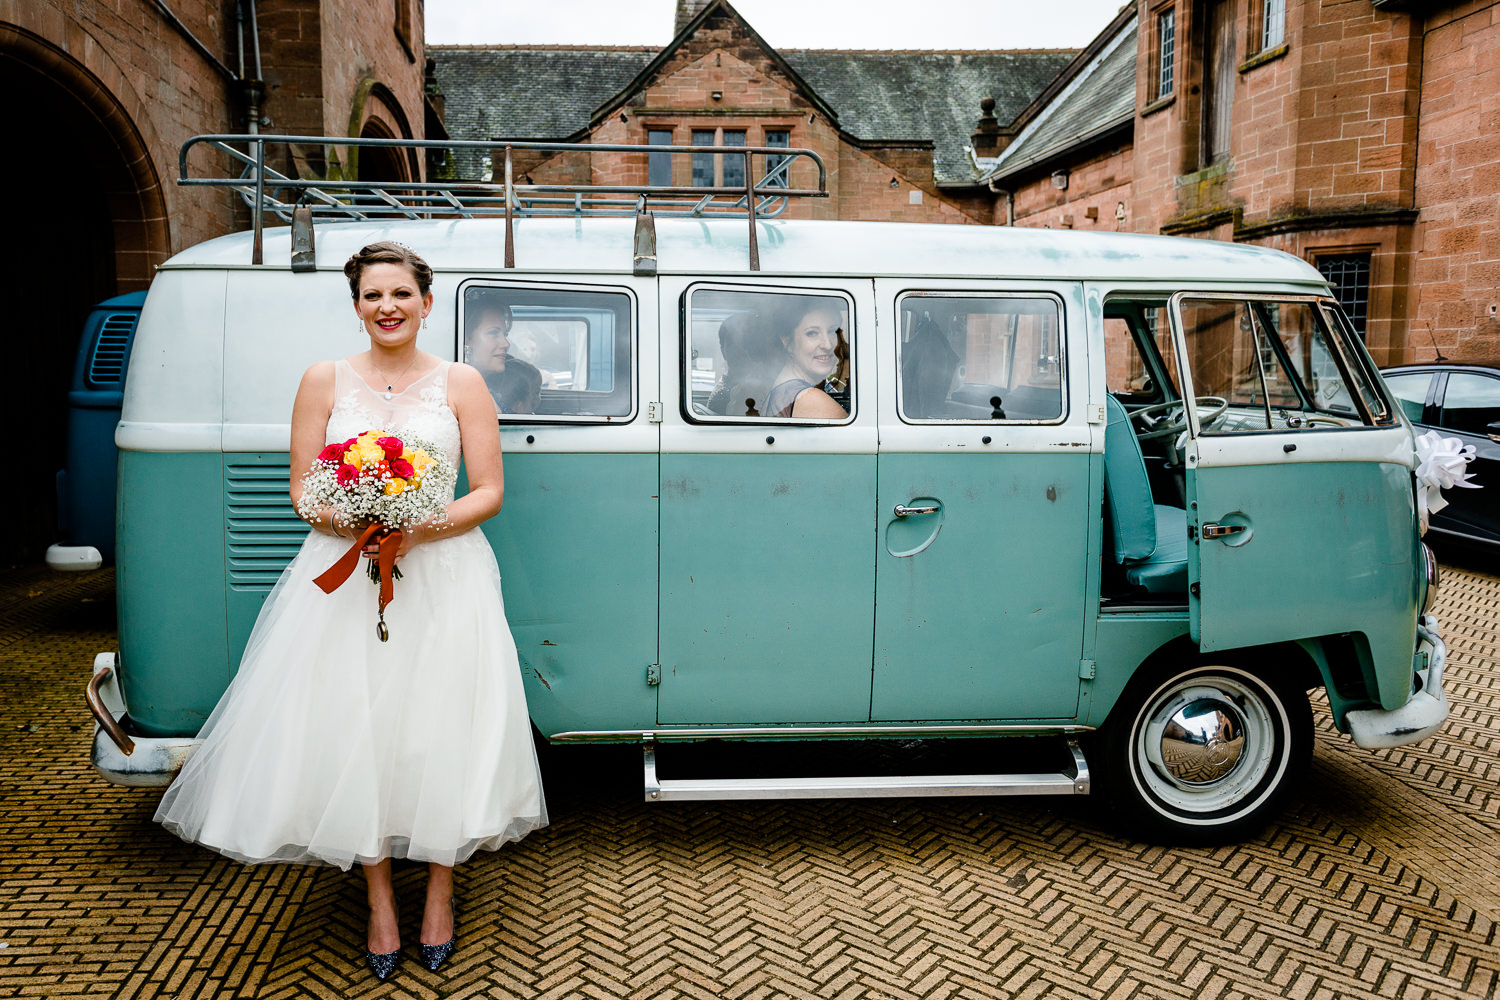 Kate, the bride, in a tea length wedding dress stood by a vintage green VW camper van in Cheshire wedding venue in Wirral, Thornton Manor. 